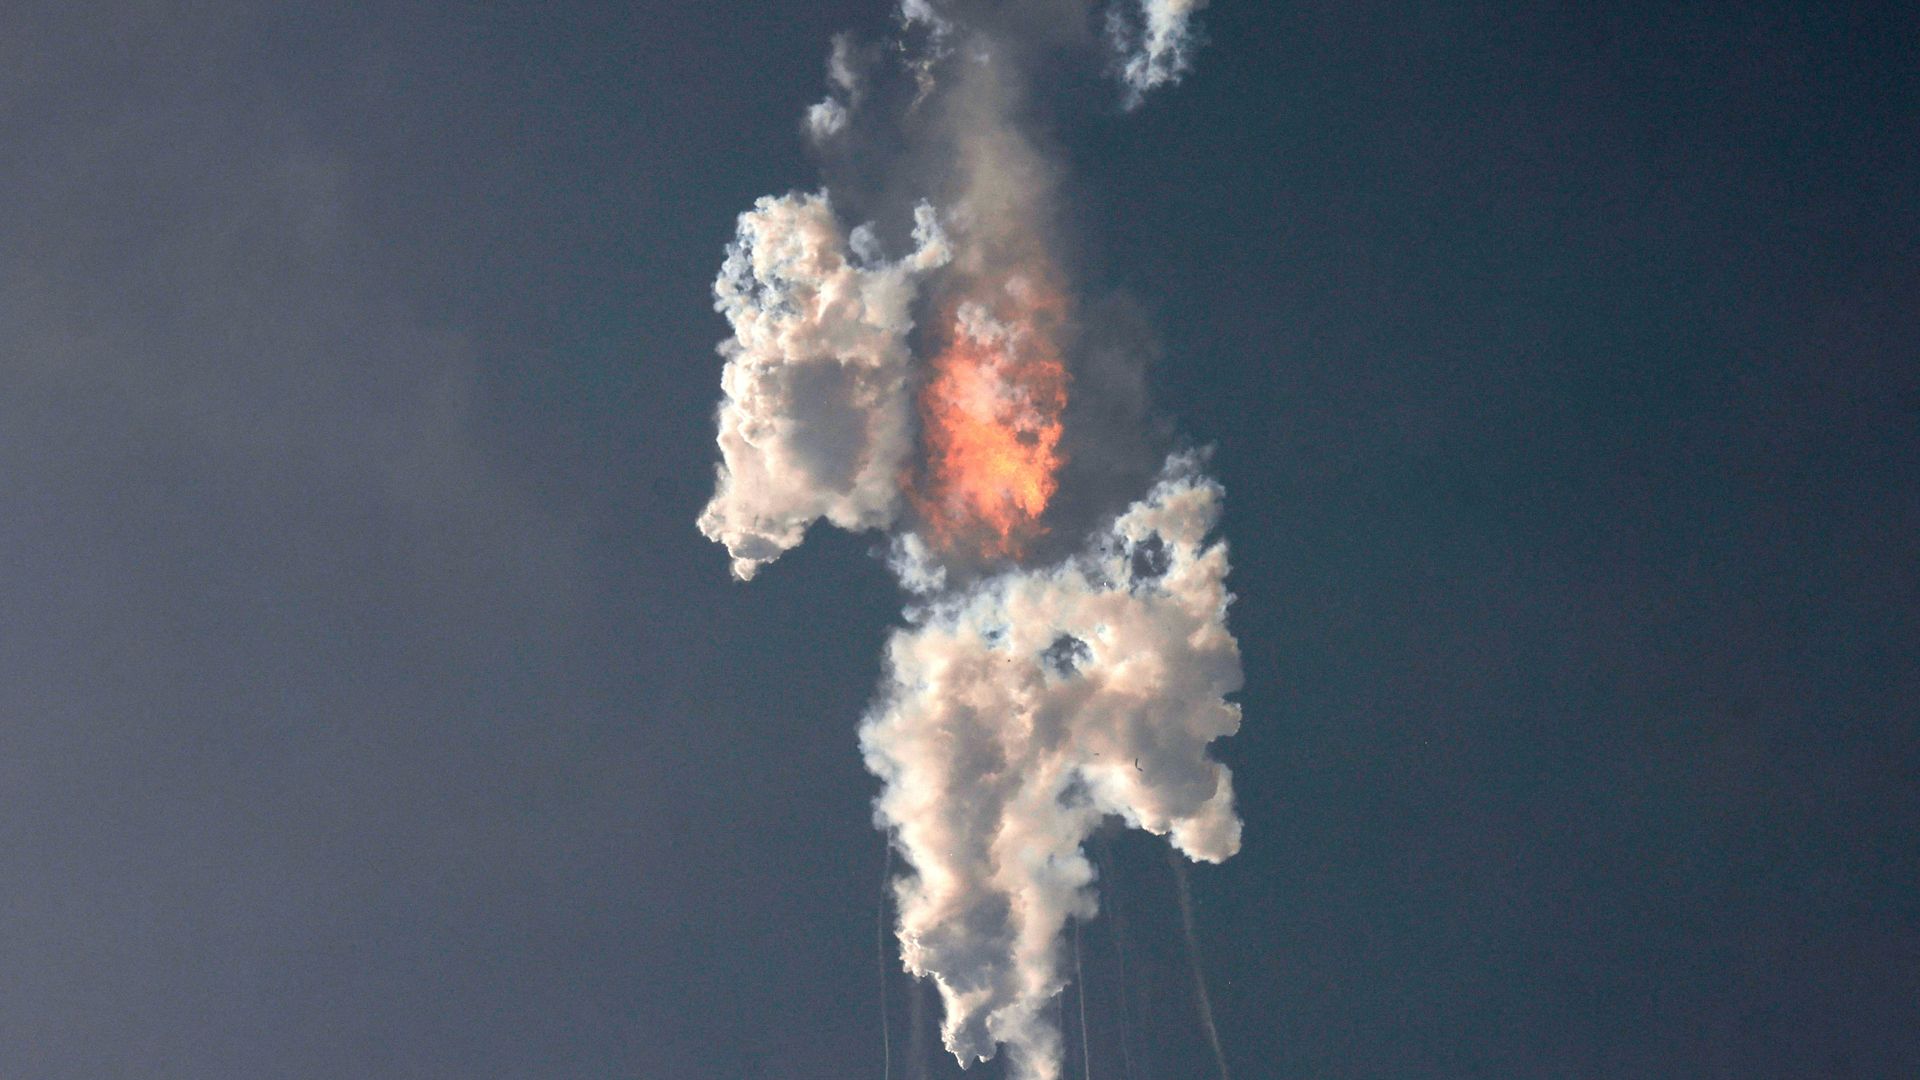 The FAA has grounded the SpaceX Starship Super Heavy launch program after the April 20 mid-air explosion that spread debris for miles.